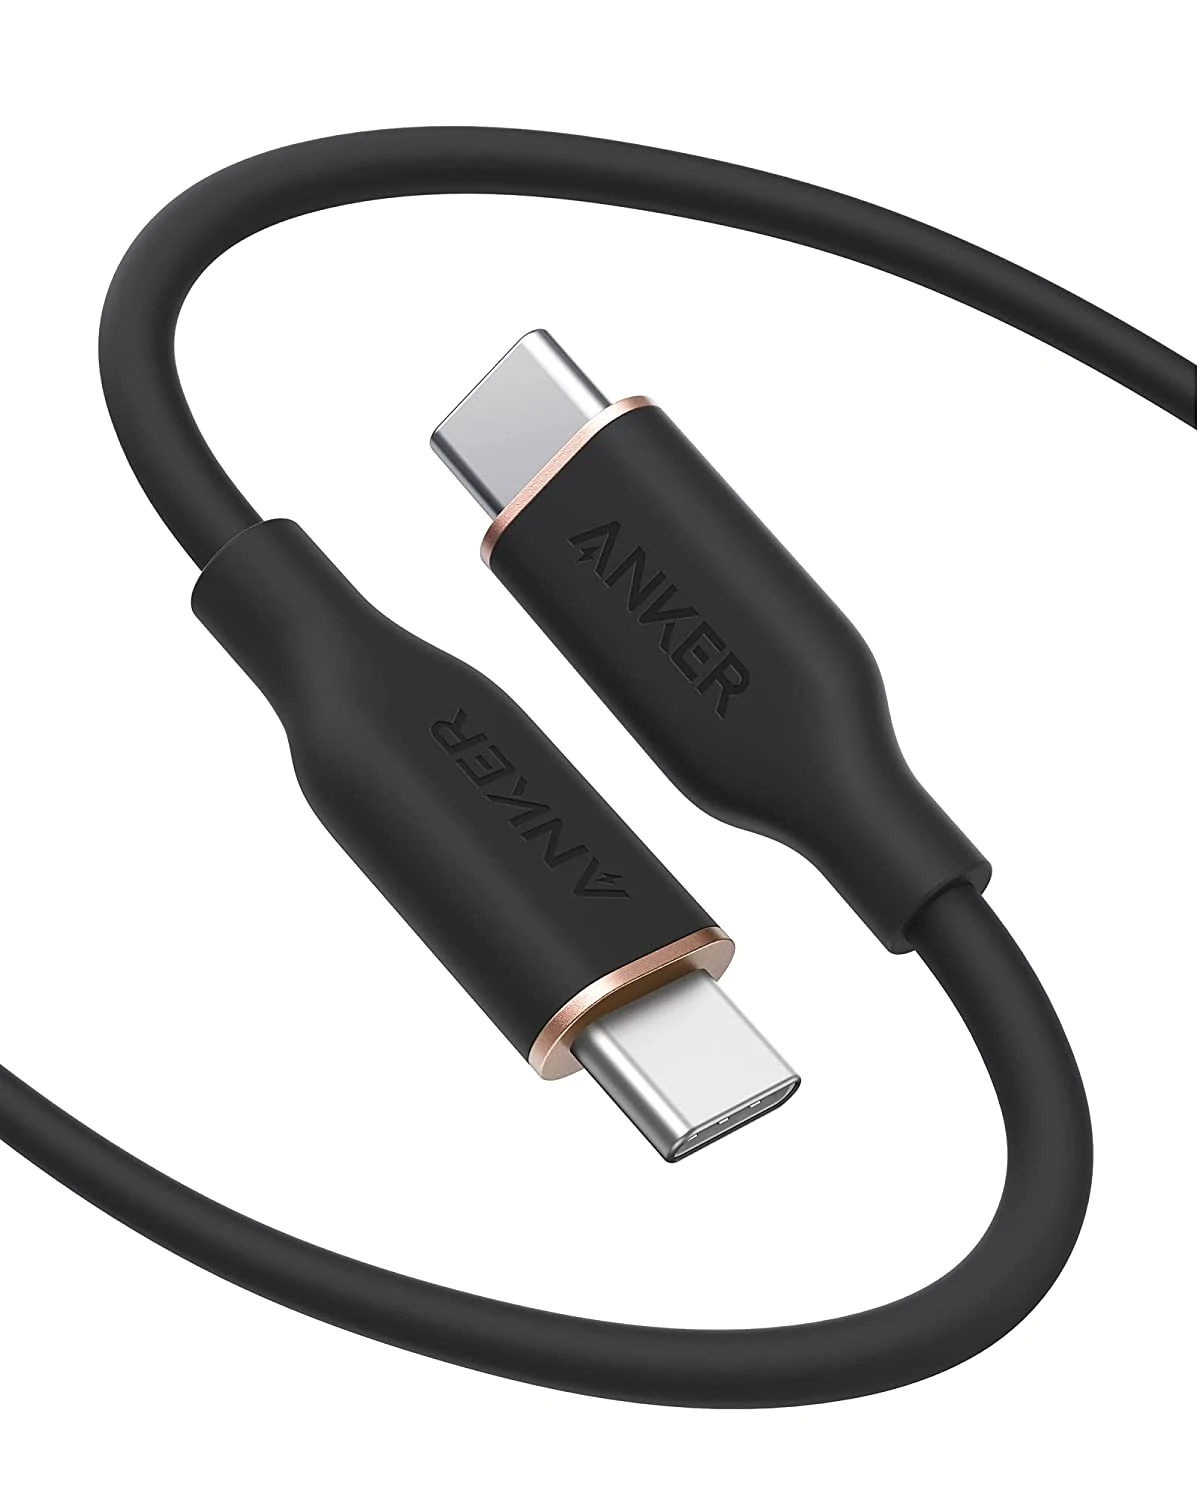 Anker powerline iii flow USB-C to USB-C Cable (6ft Silicone) Asia Mobile  Phone